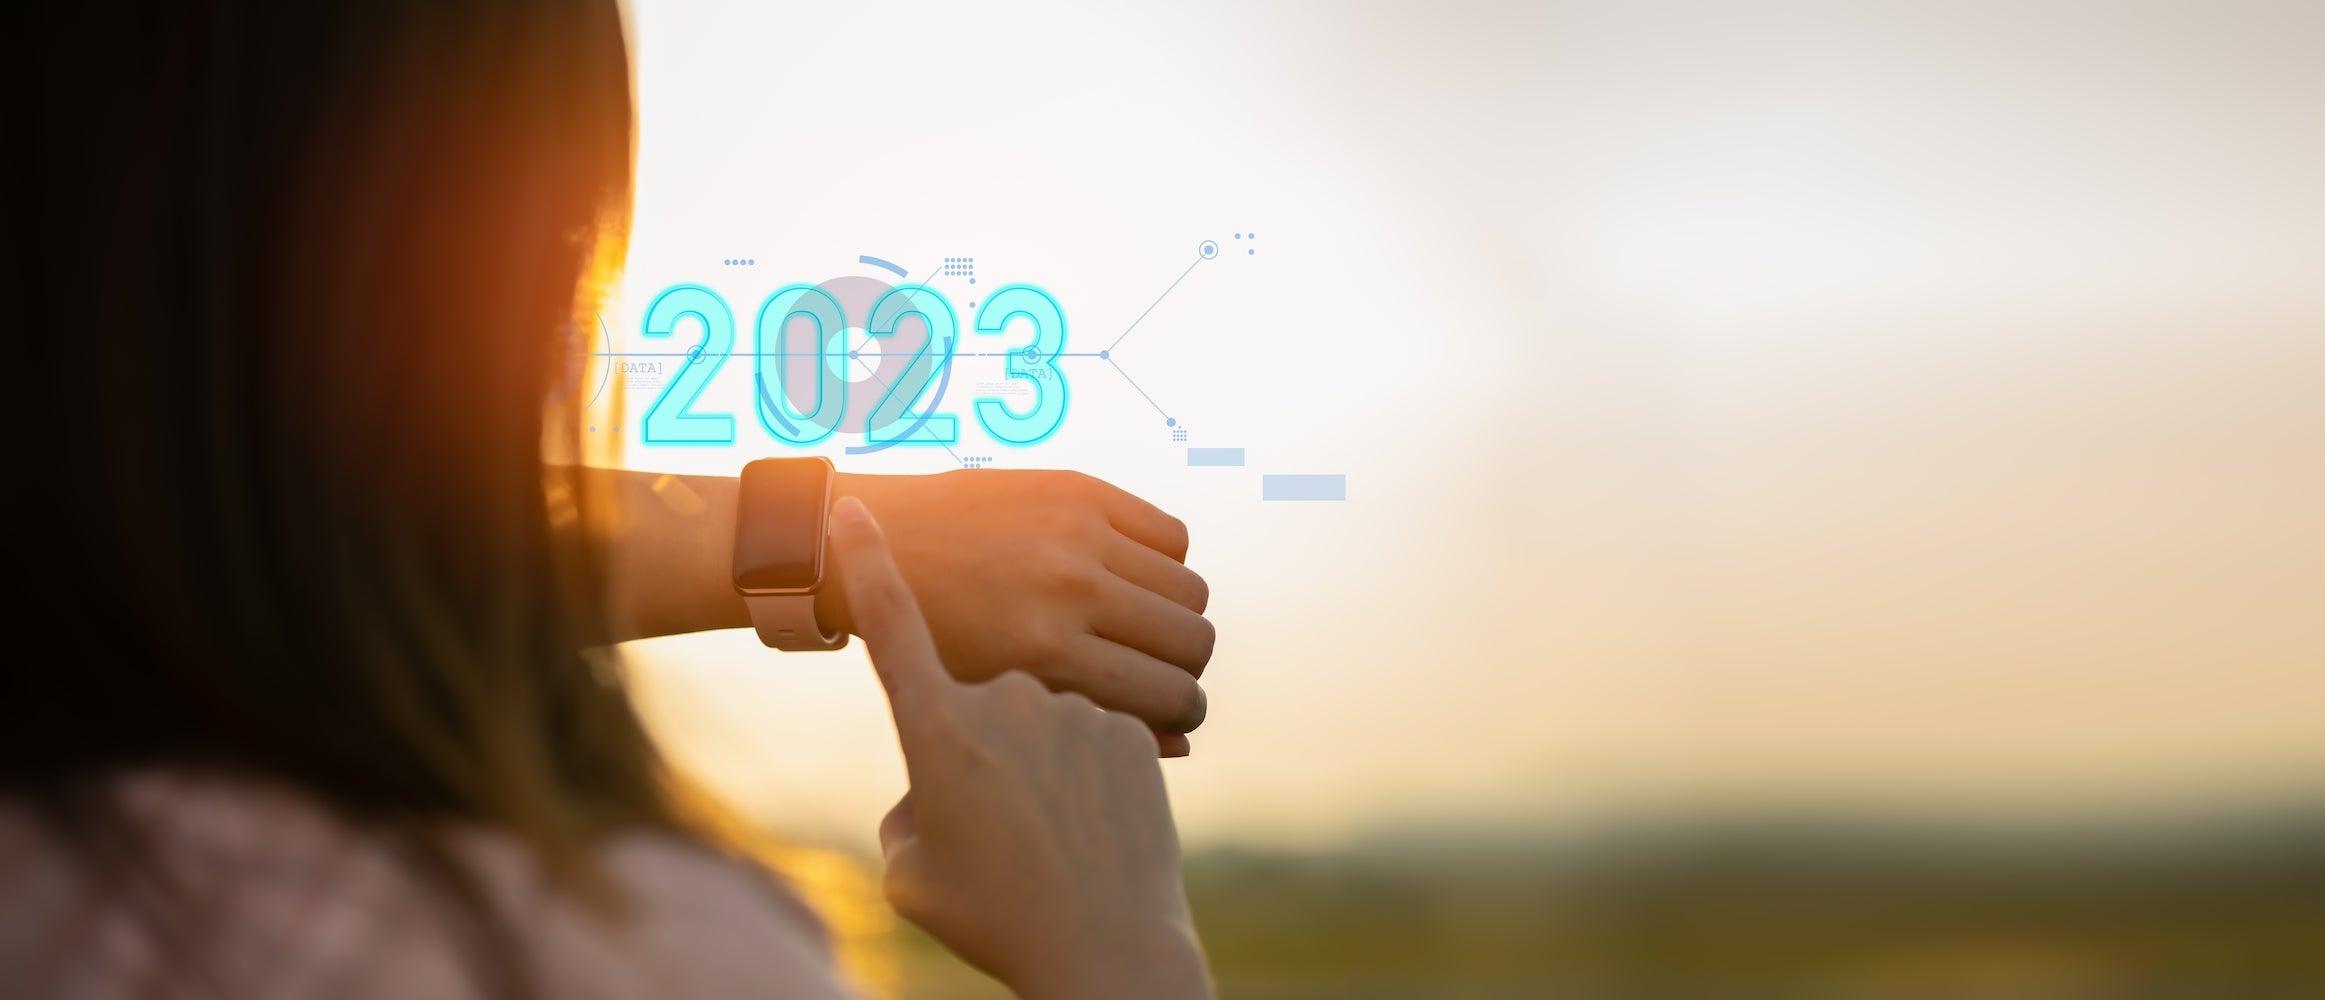 The Hottest Watchband Trends for 2023 - watchband.direct